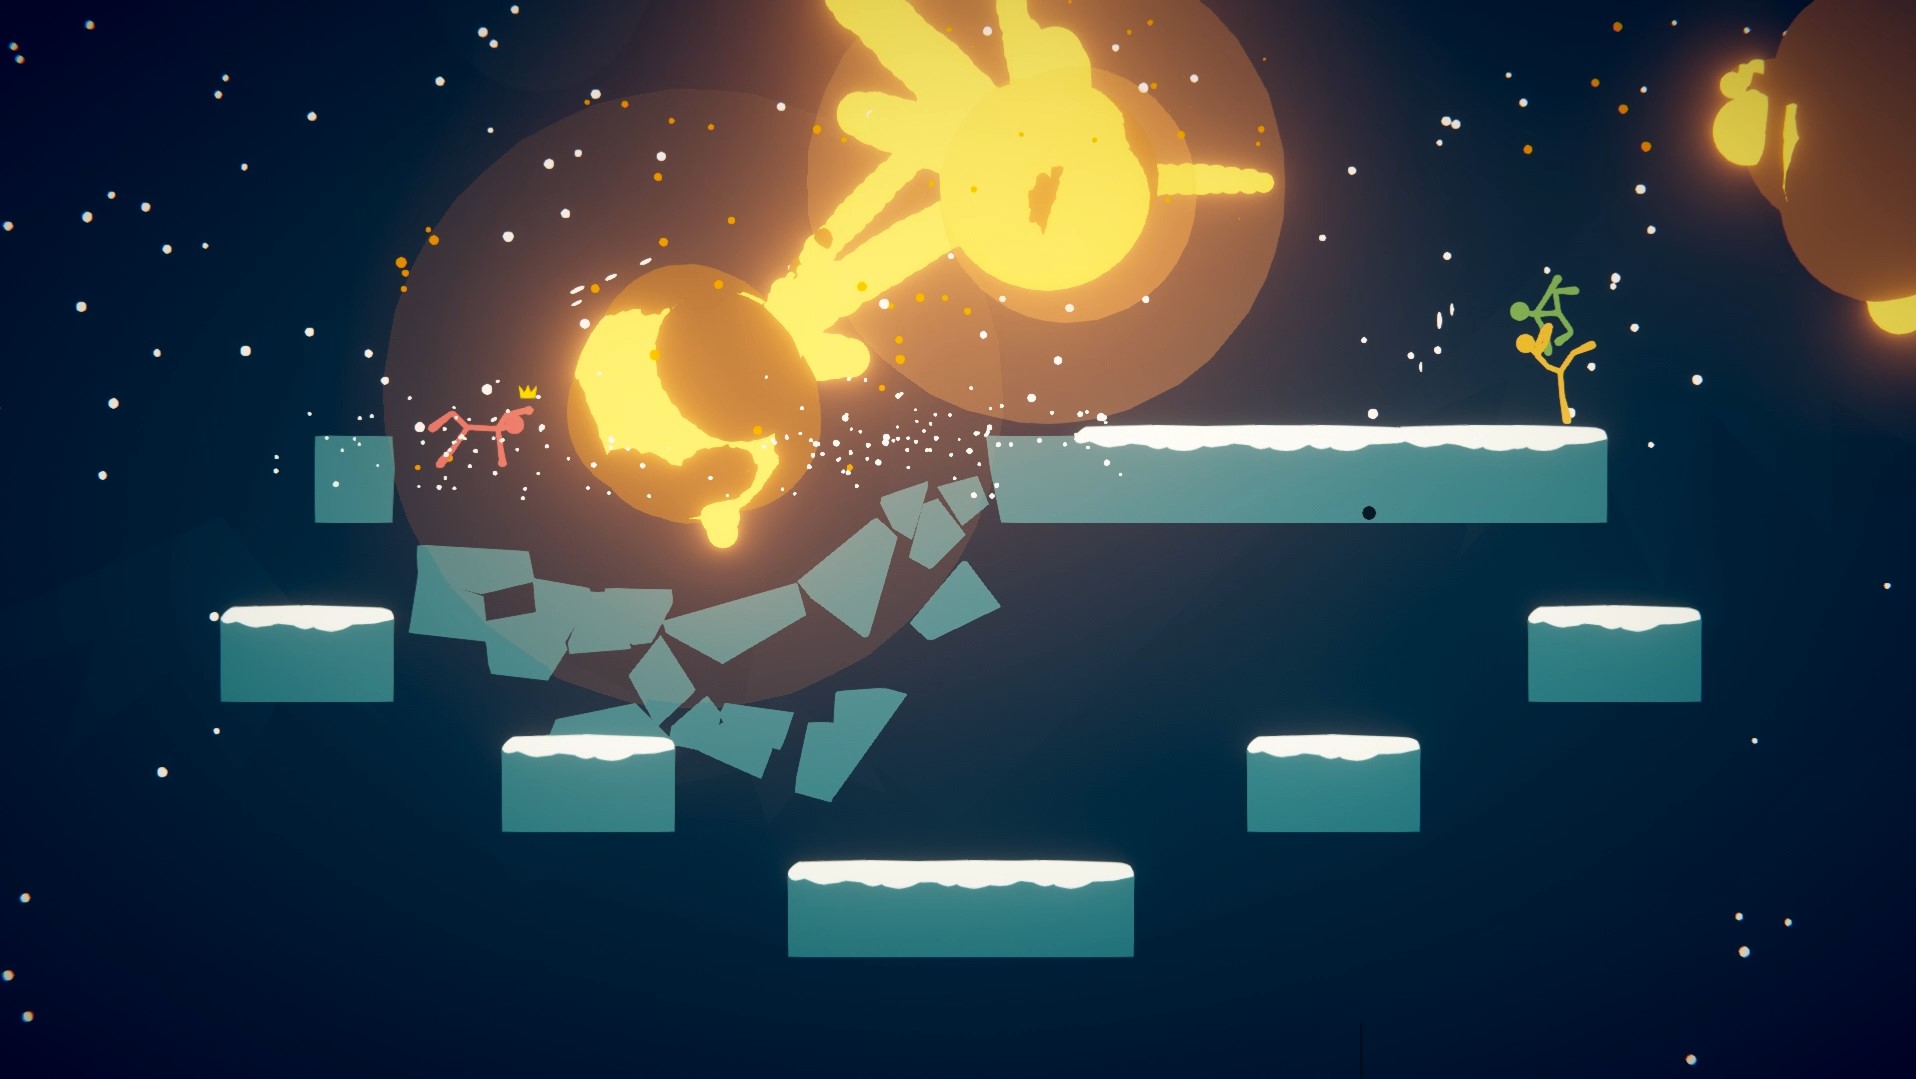 Stick Fighter  Play Now Online for Free 